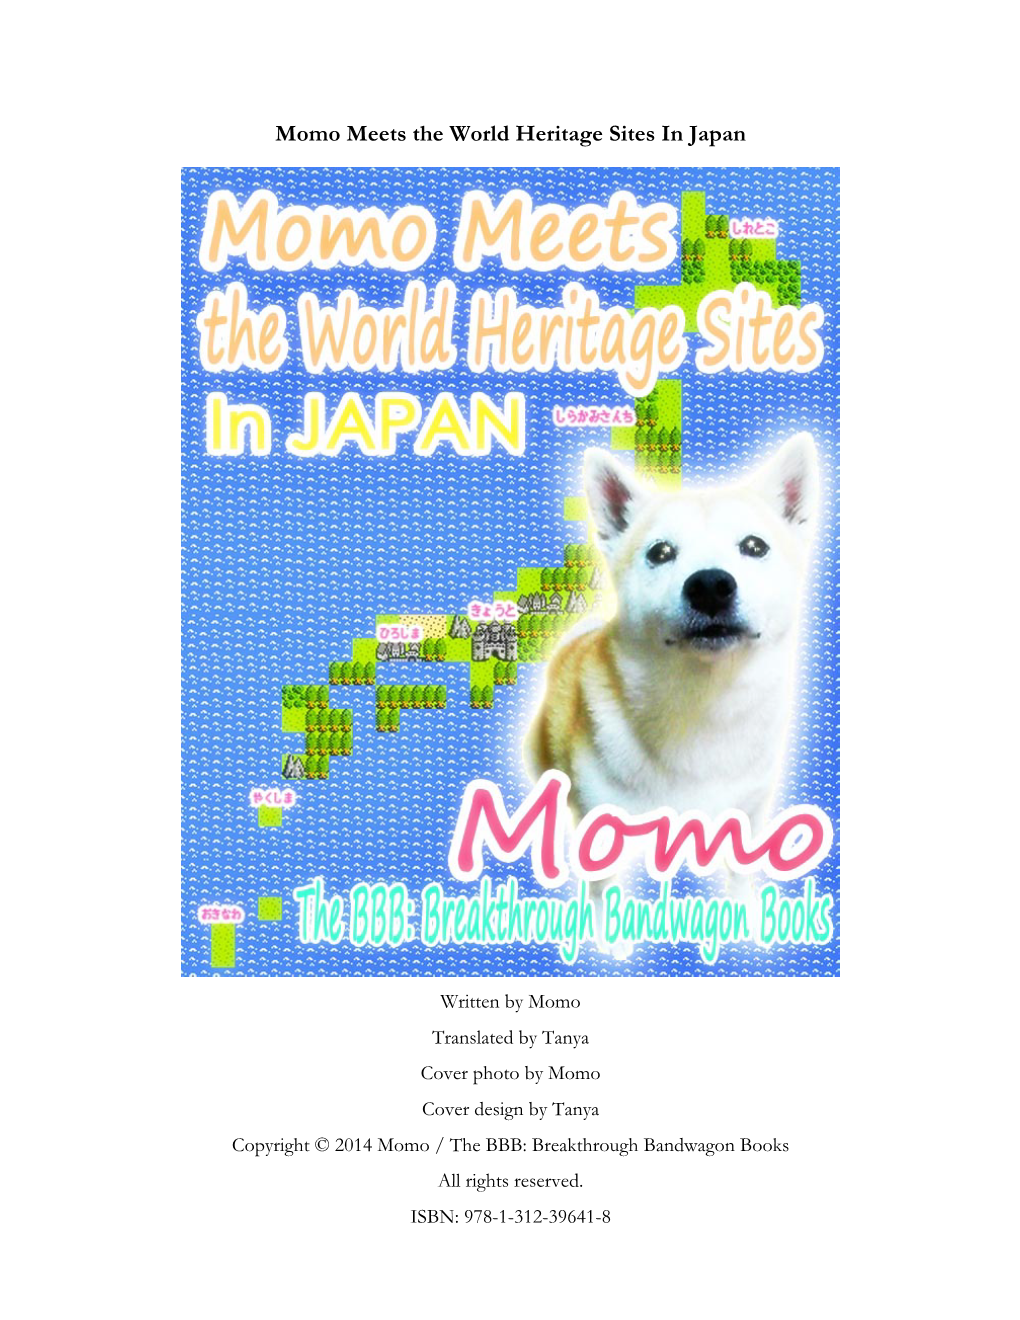 Momo Meets the World Heritage Sites in Japan